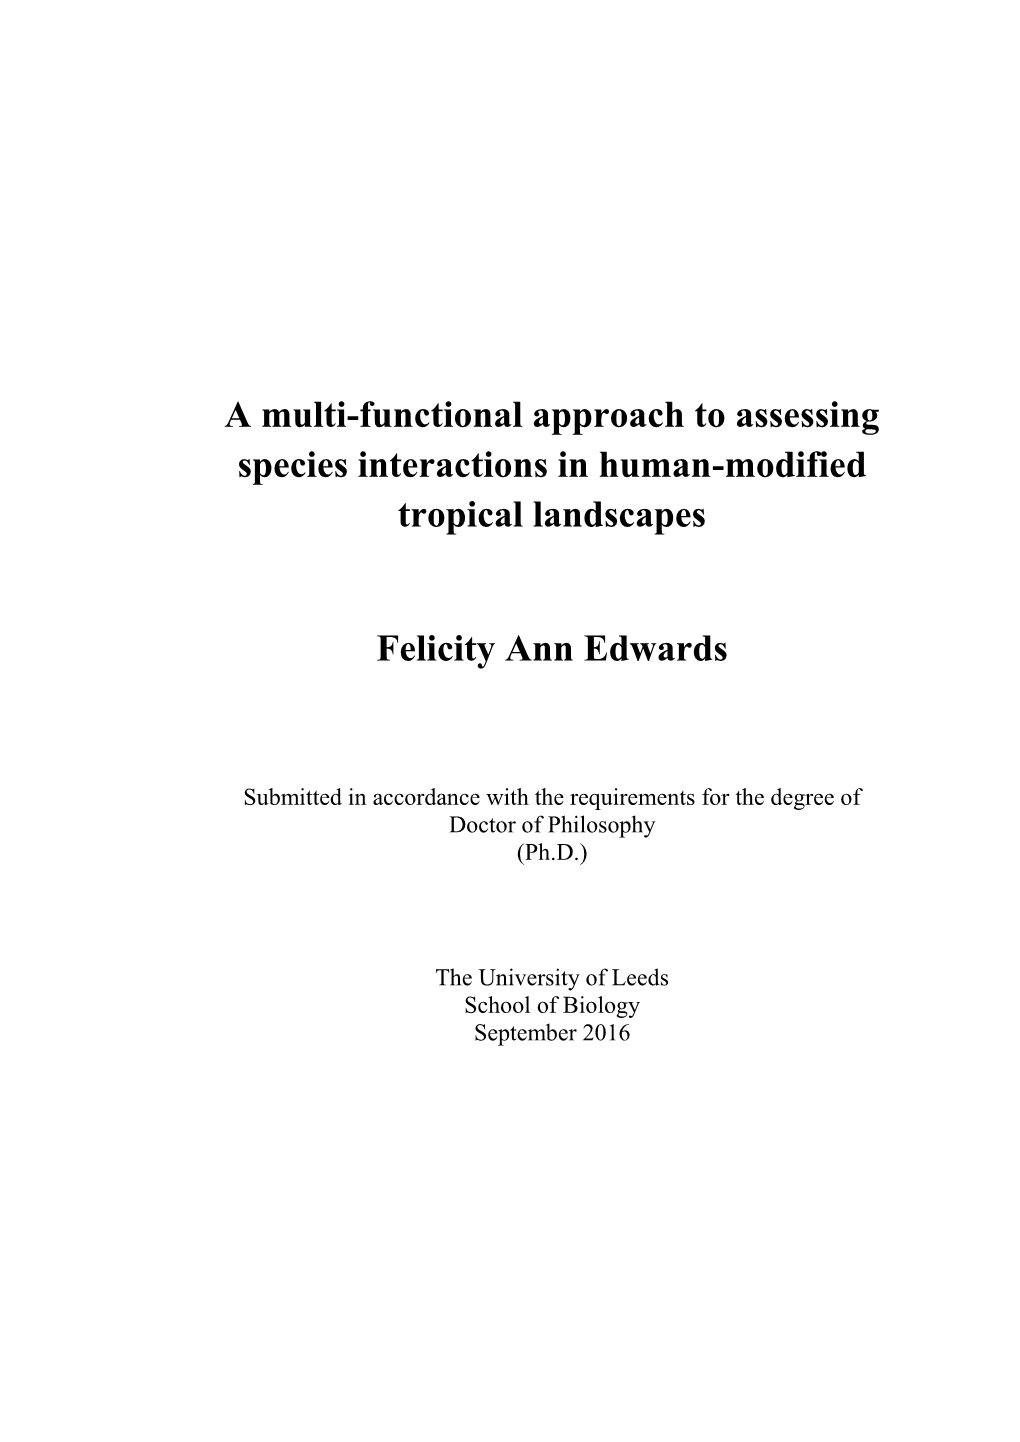 A Multi-Functional Approach to Assessing Species Interactions in Human-Modified Tropical Landscapes Felicity Ann Edwards